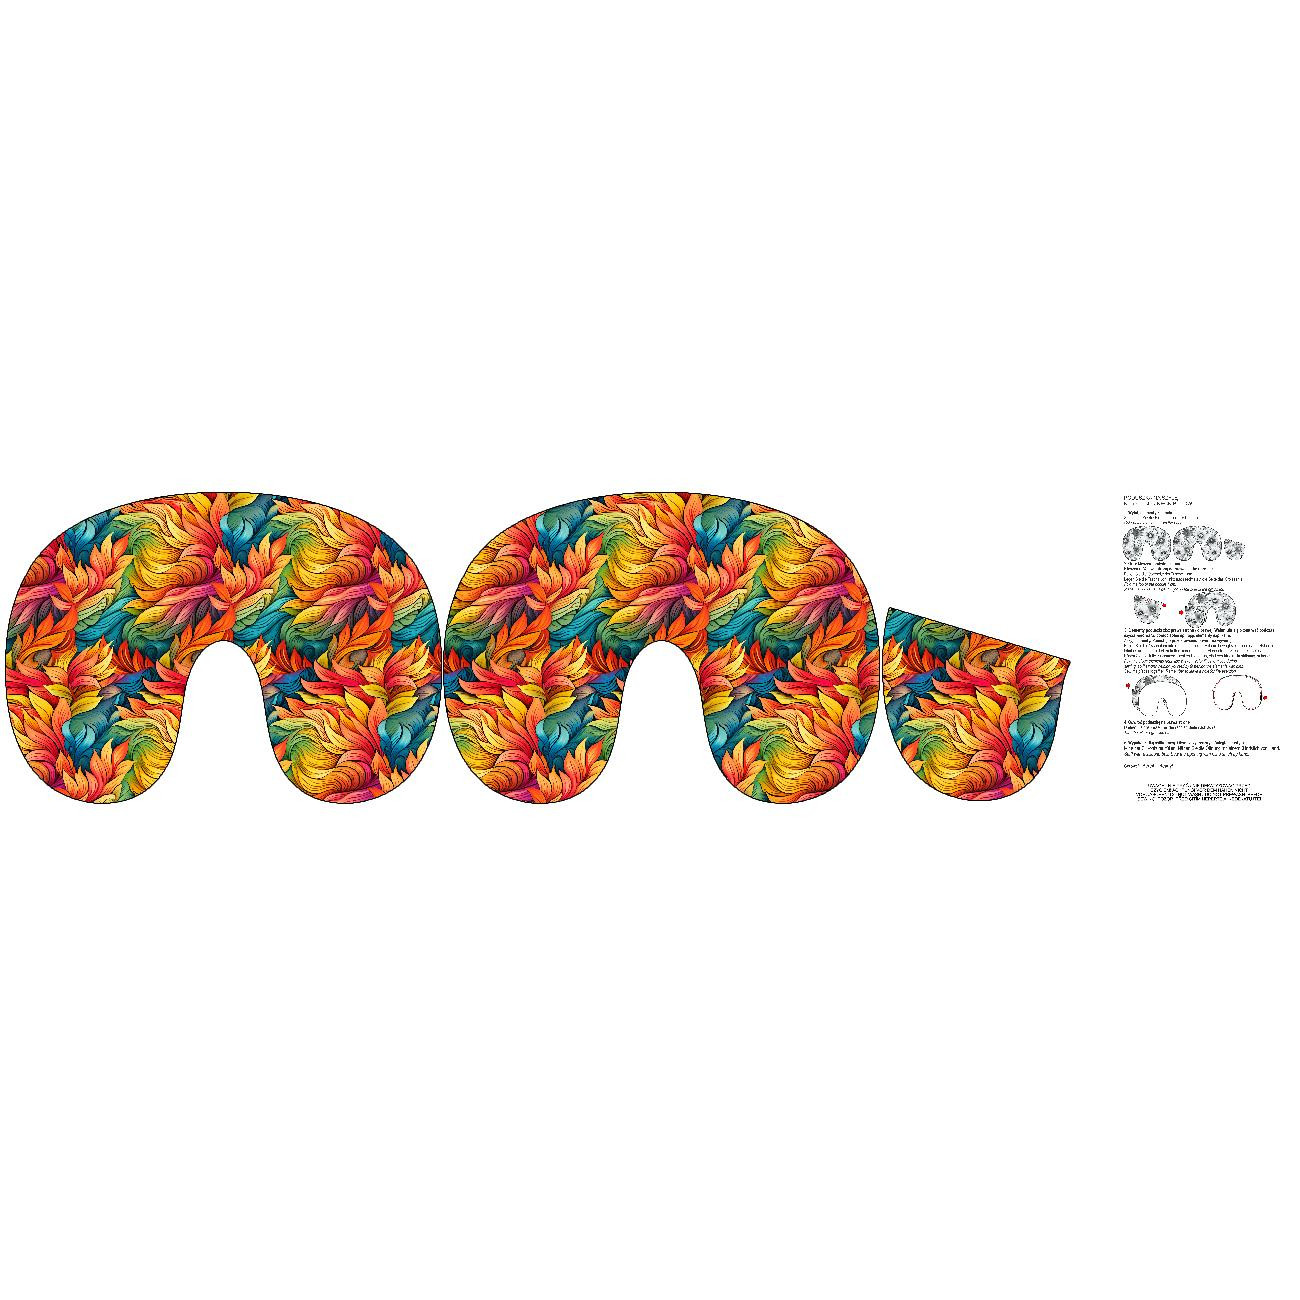 NECK PILLOW - COLORFUL LEAVES pat. 4 - sewing set